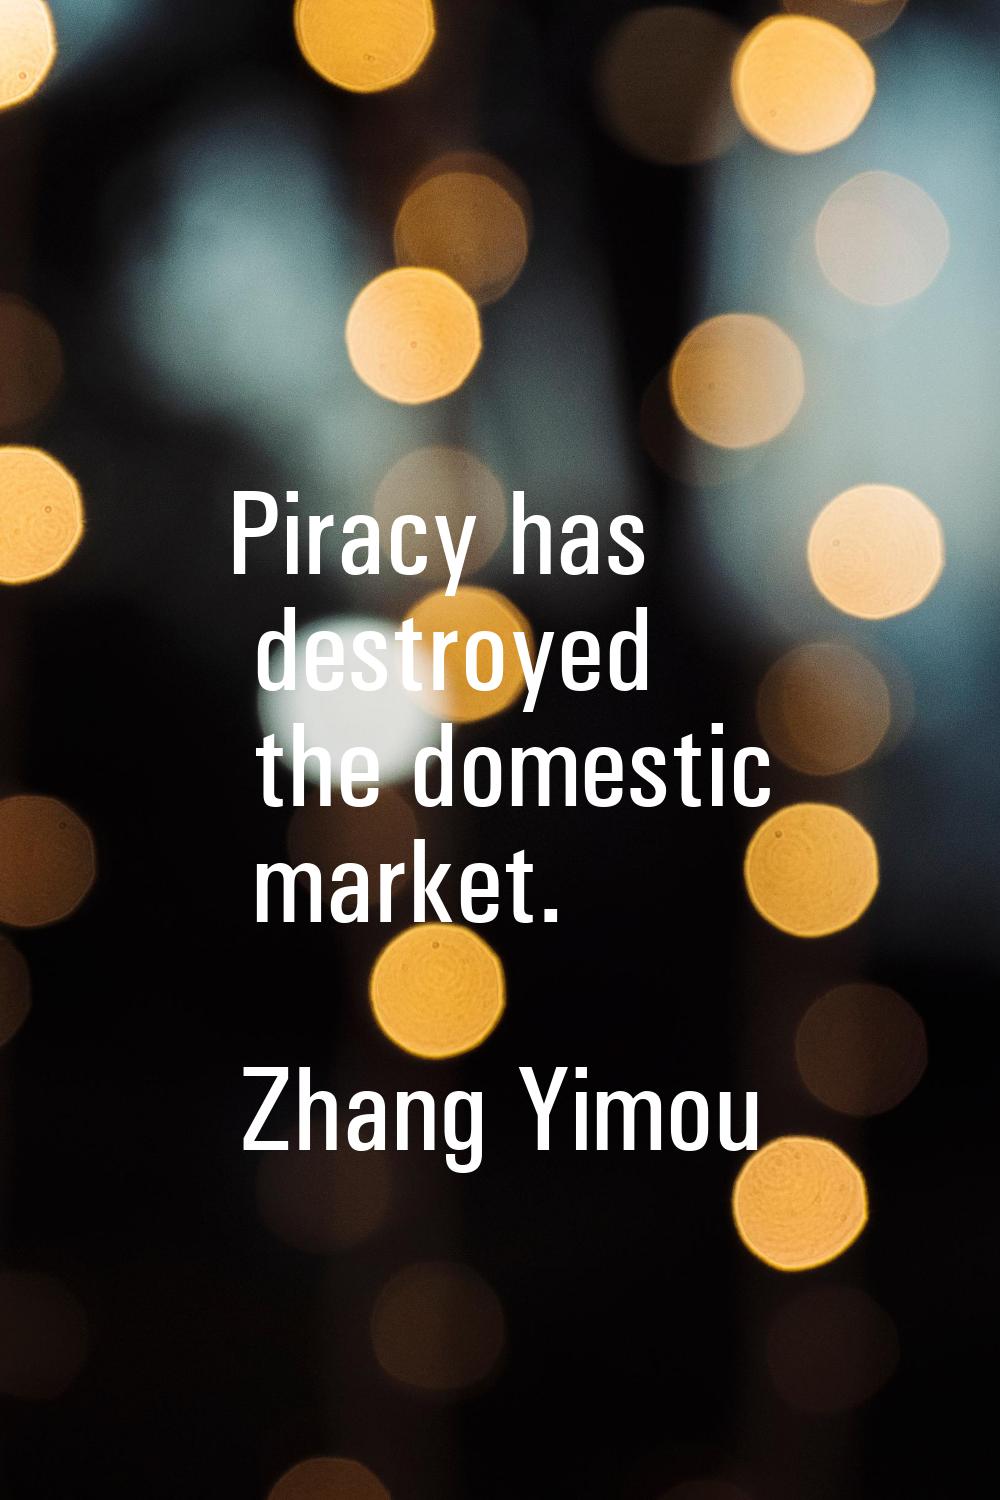 Piracy has destroyed the domestic market.